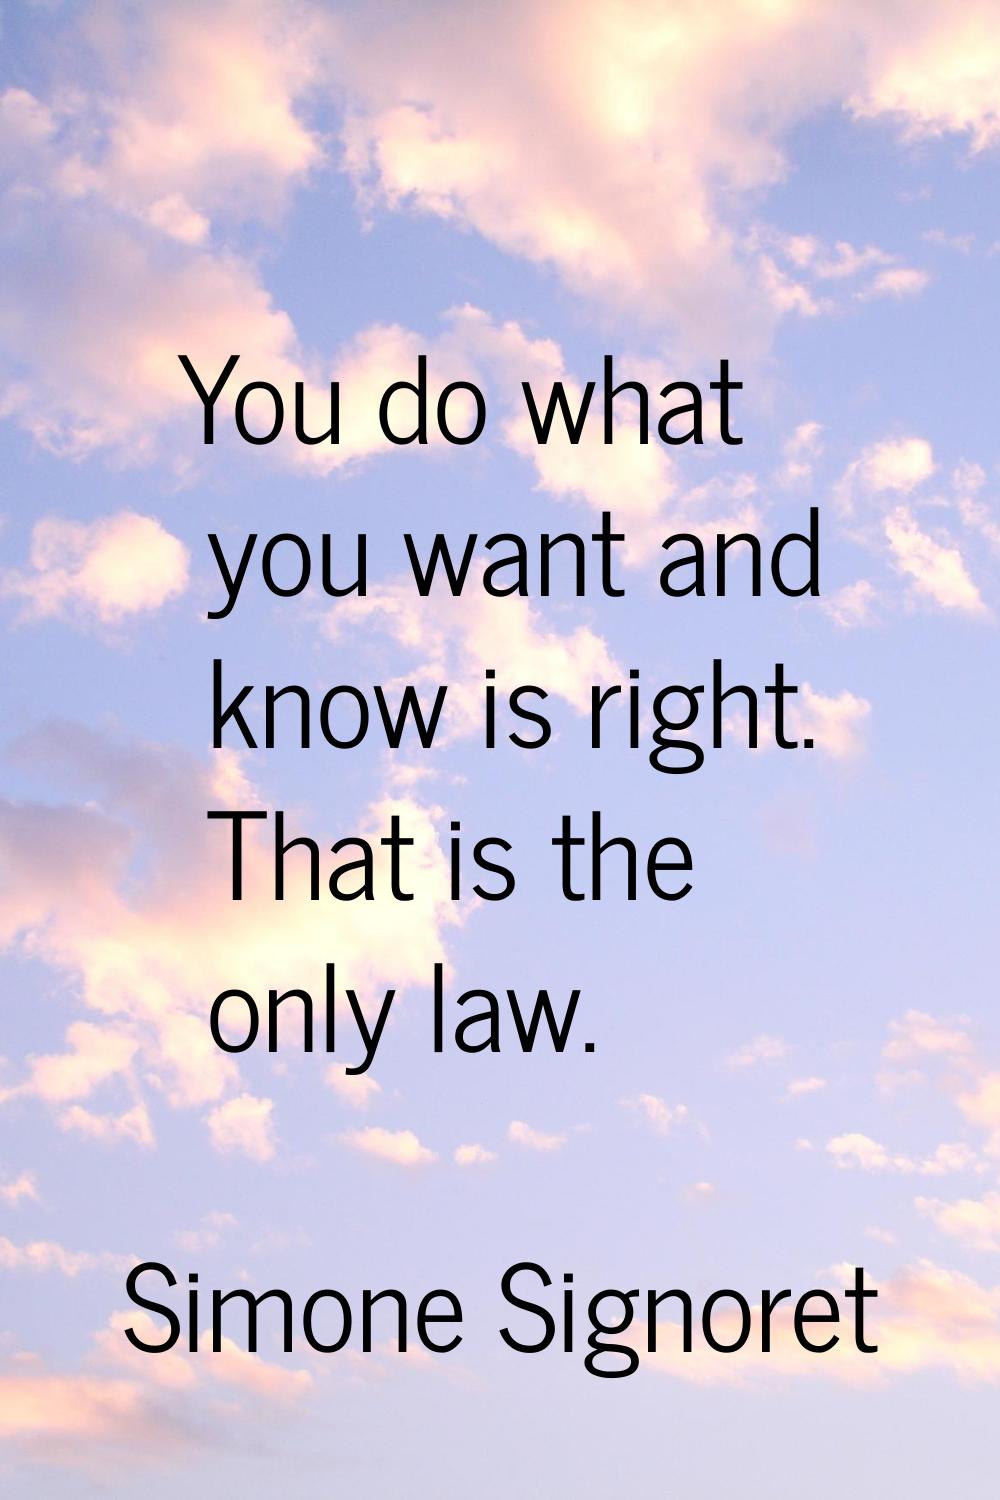 You do what you want and know is right. That is the only law.